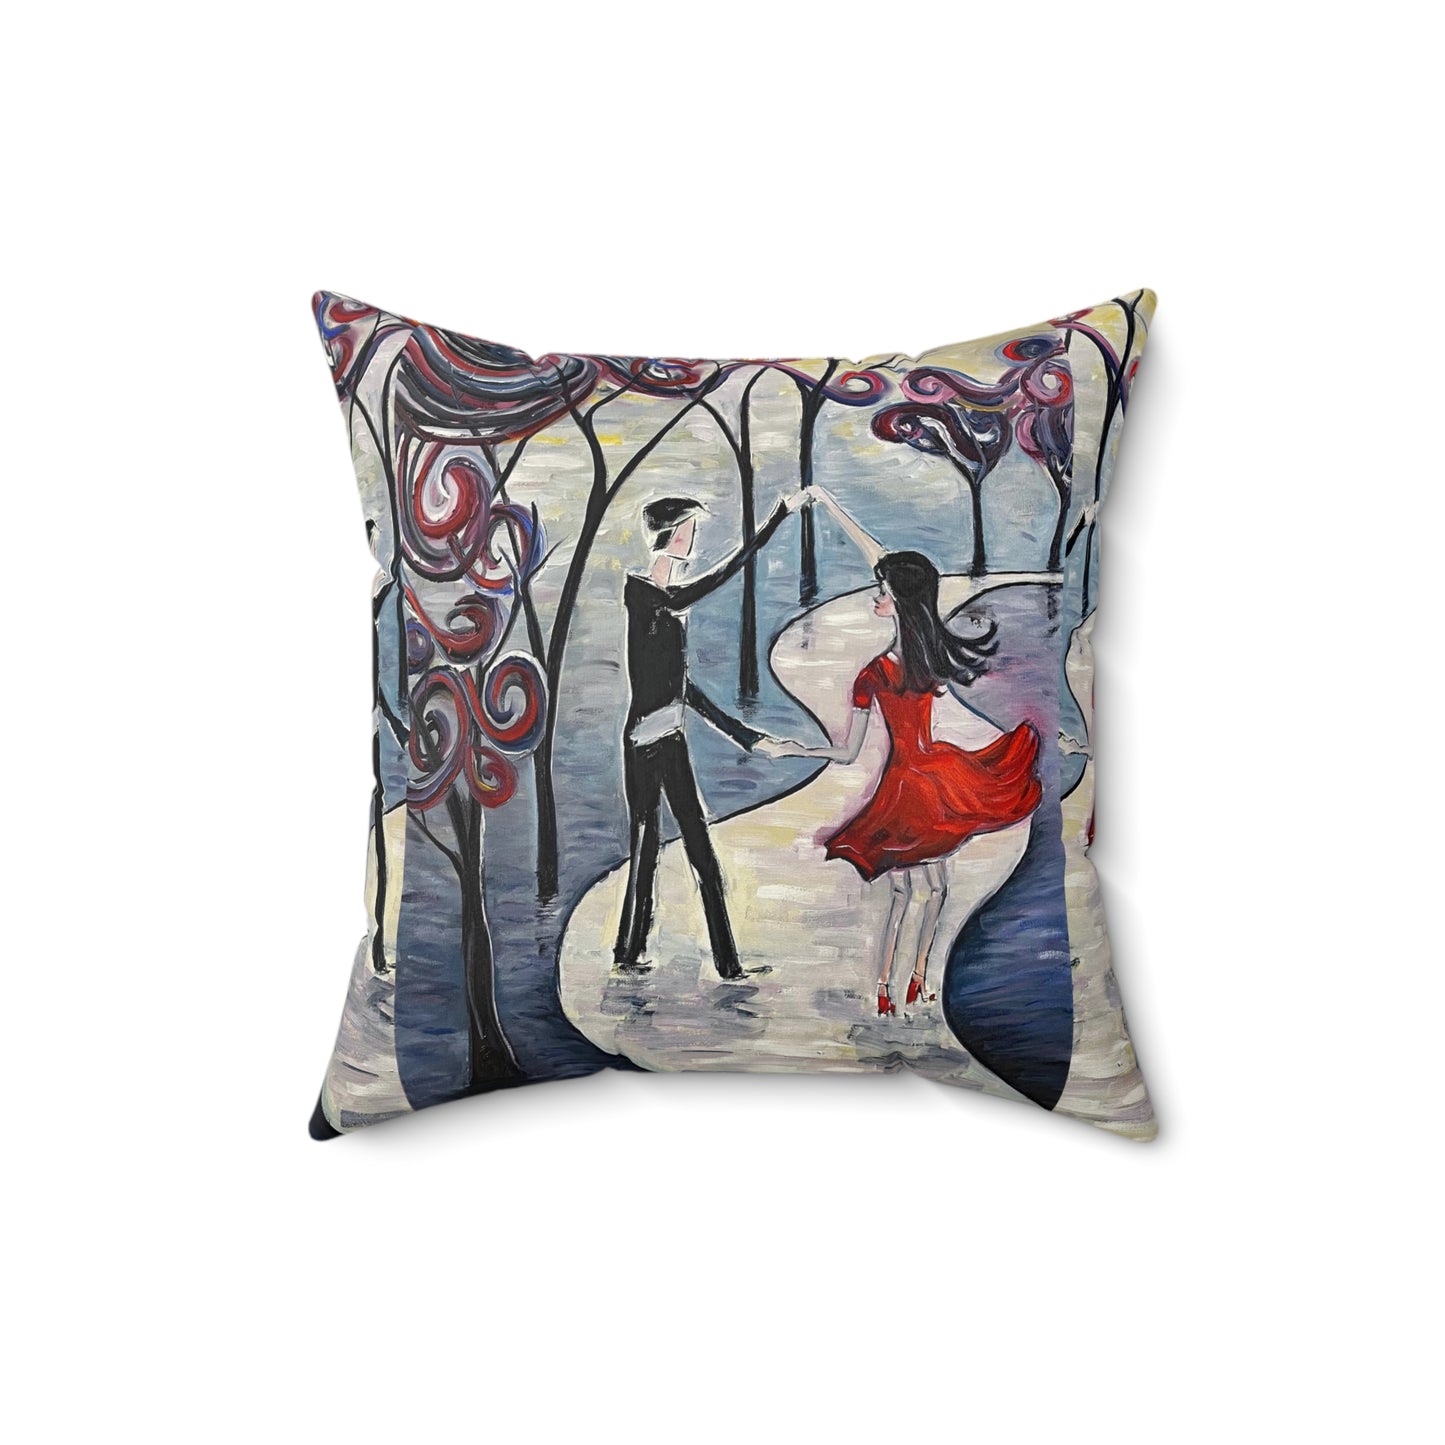 Dancing in the Moonlight (Romantic Couple) Indoor Spun Polyester Square Pillow